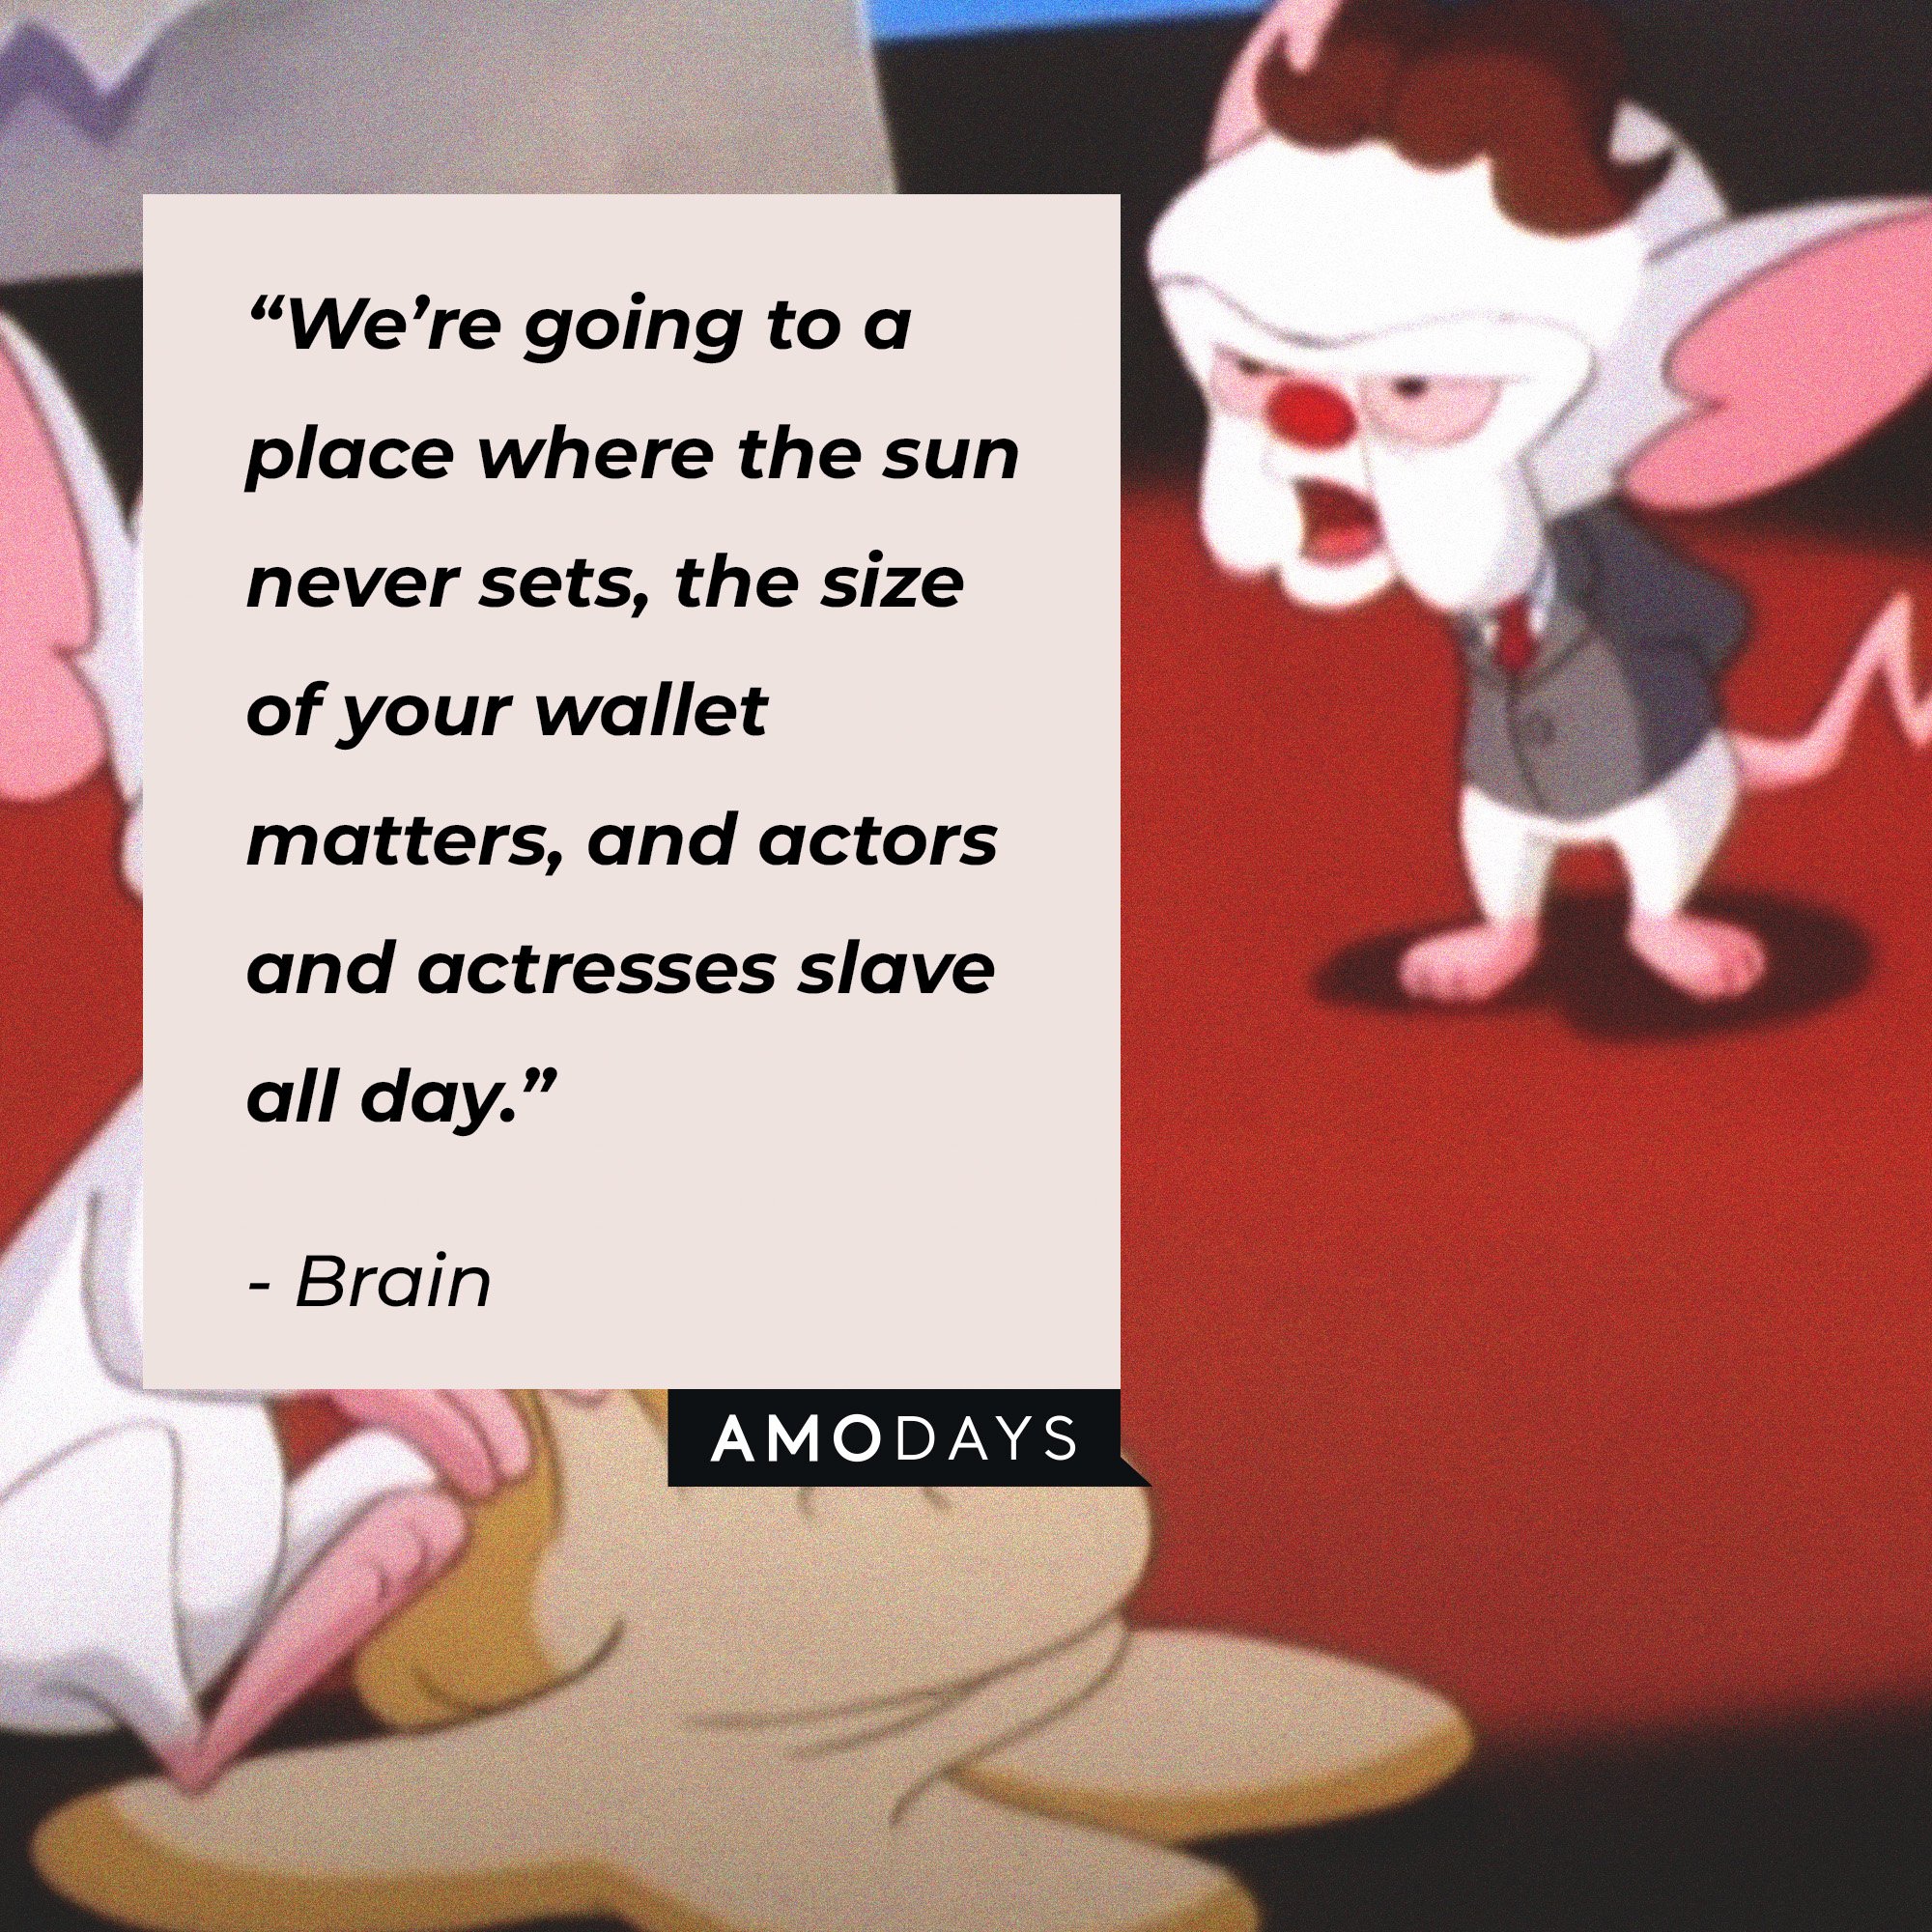 Brain's quote: “We’re going to a place where the sun never sets, the size of your wallet matters, and actors and actresses slave all day.” | Image: AmoDays